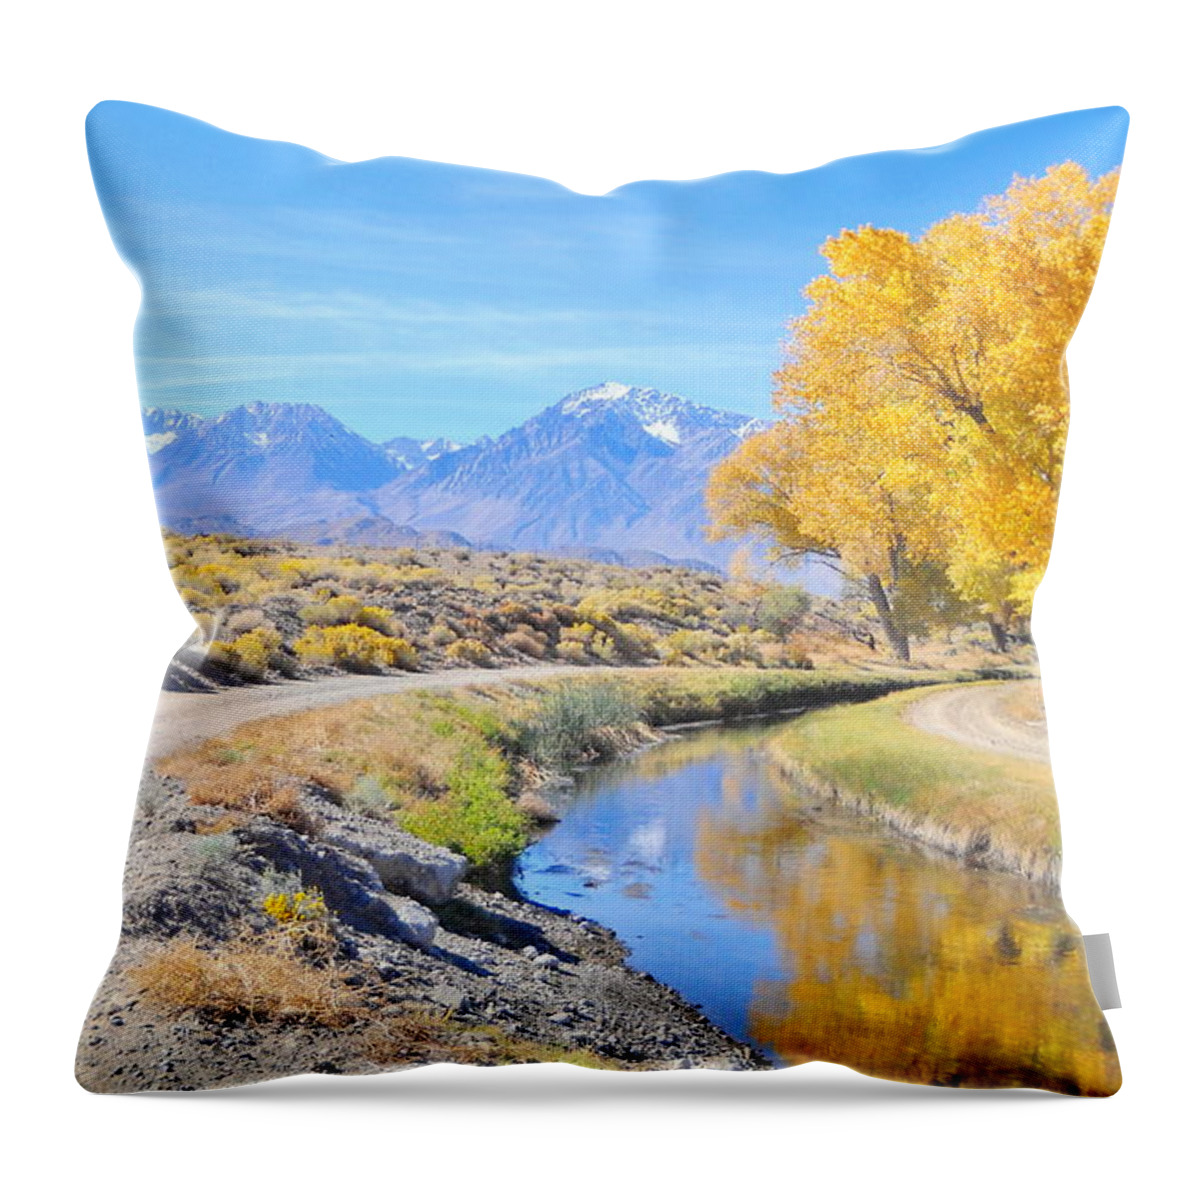 Fall Throw Pillow featuring the photograph Fall Reflections by Marilyn Diaz